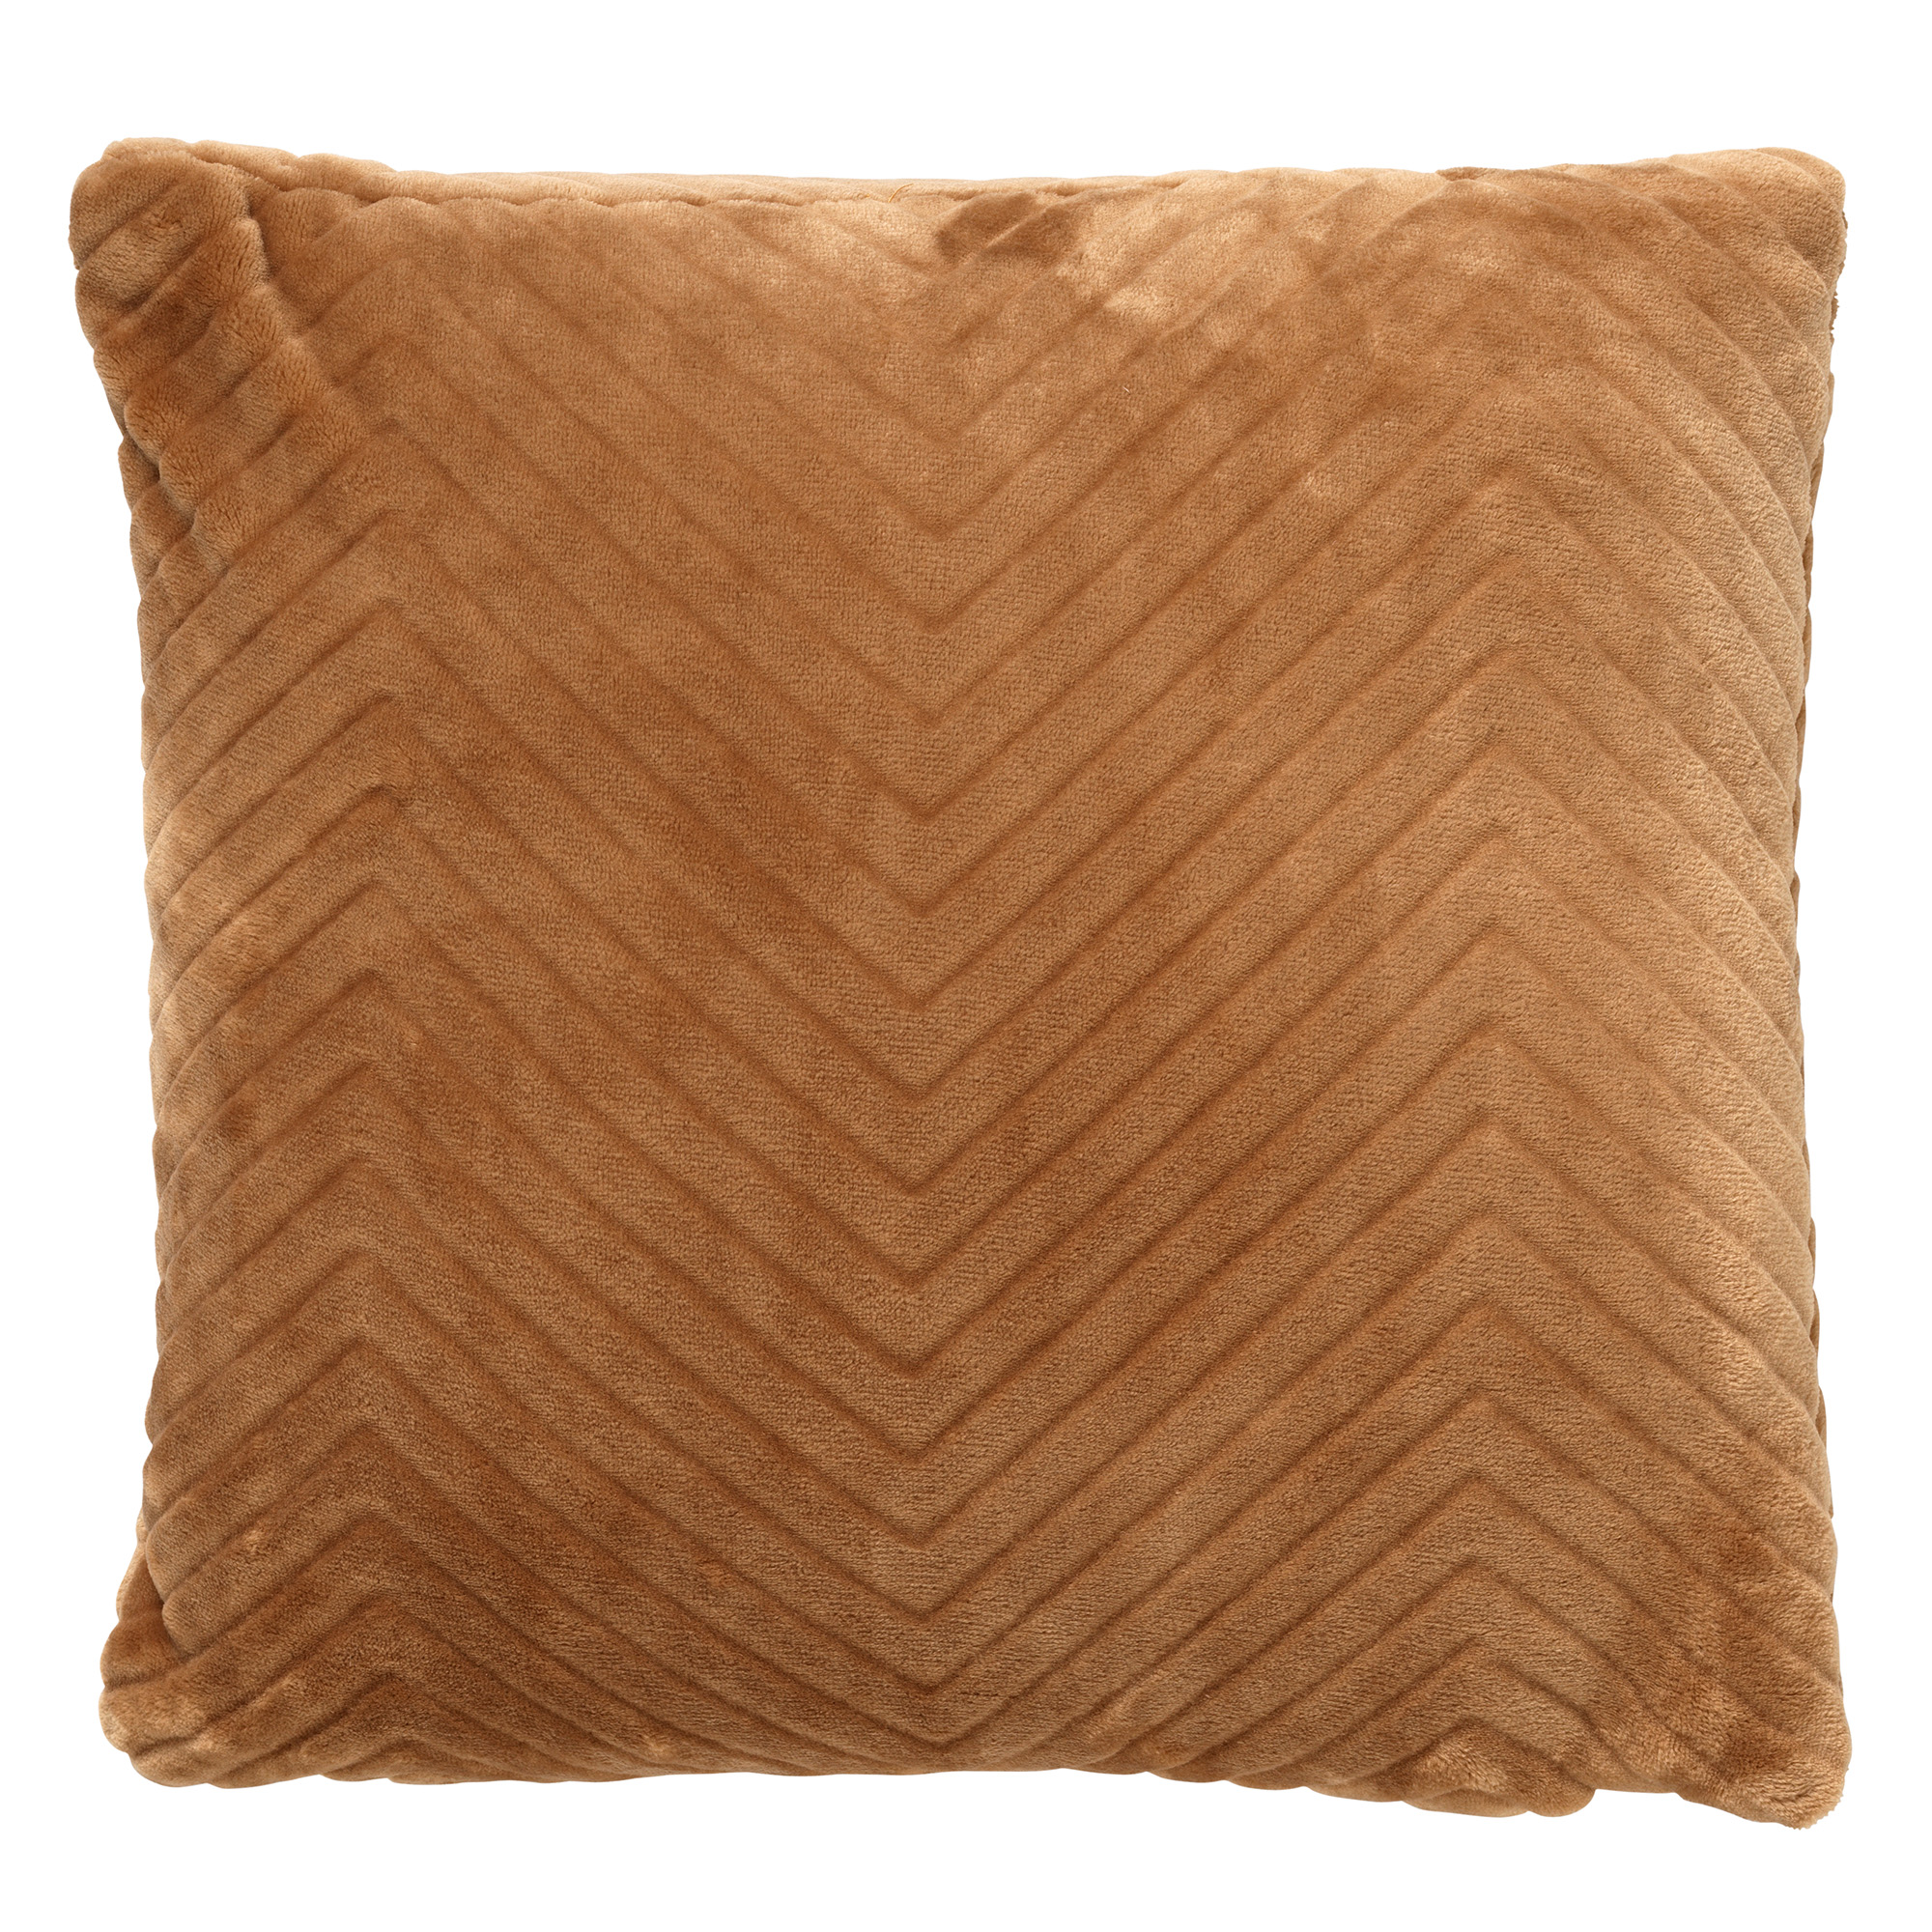 ZICO - Cushion with pattern 45x45 cm Tobacco Brown